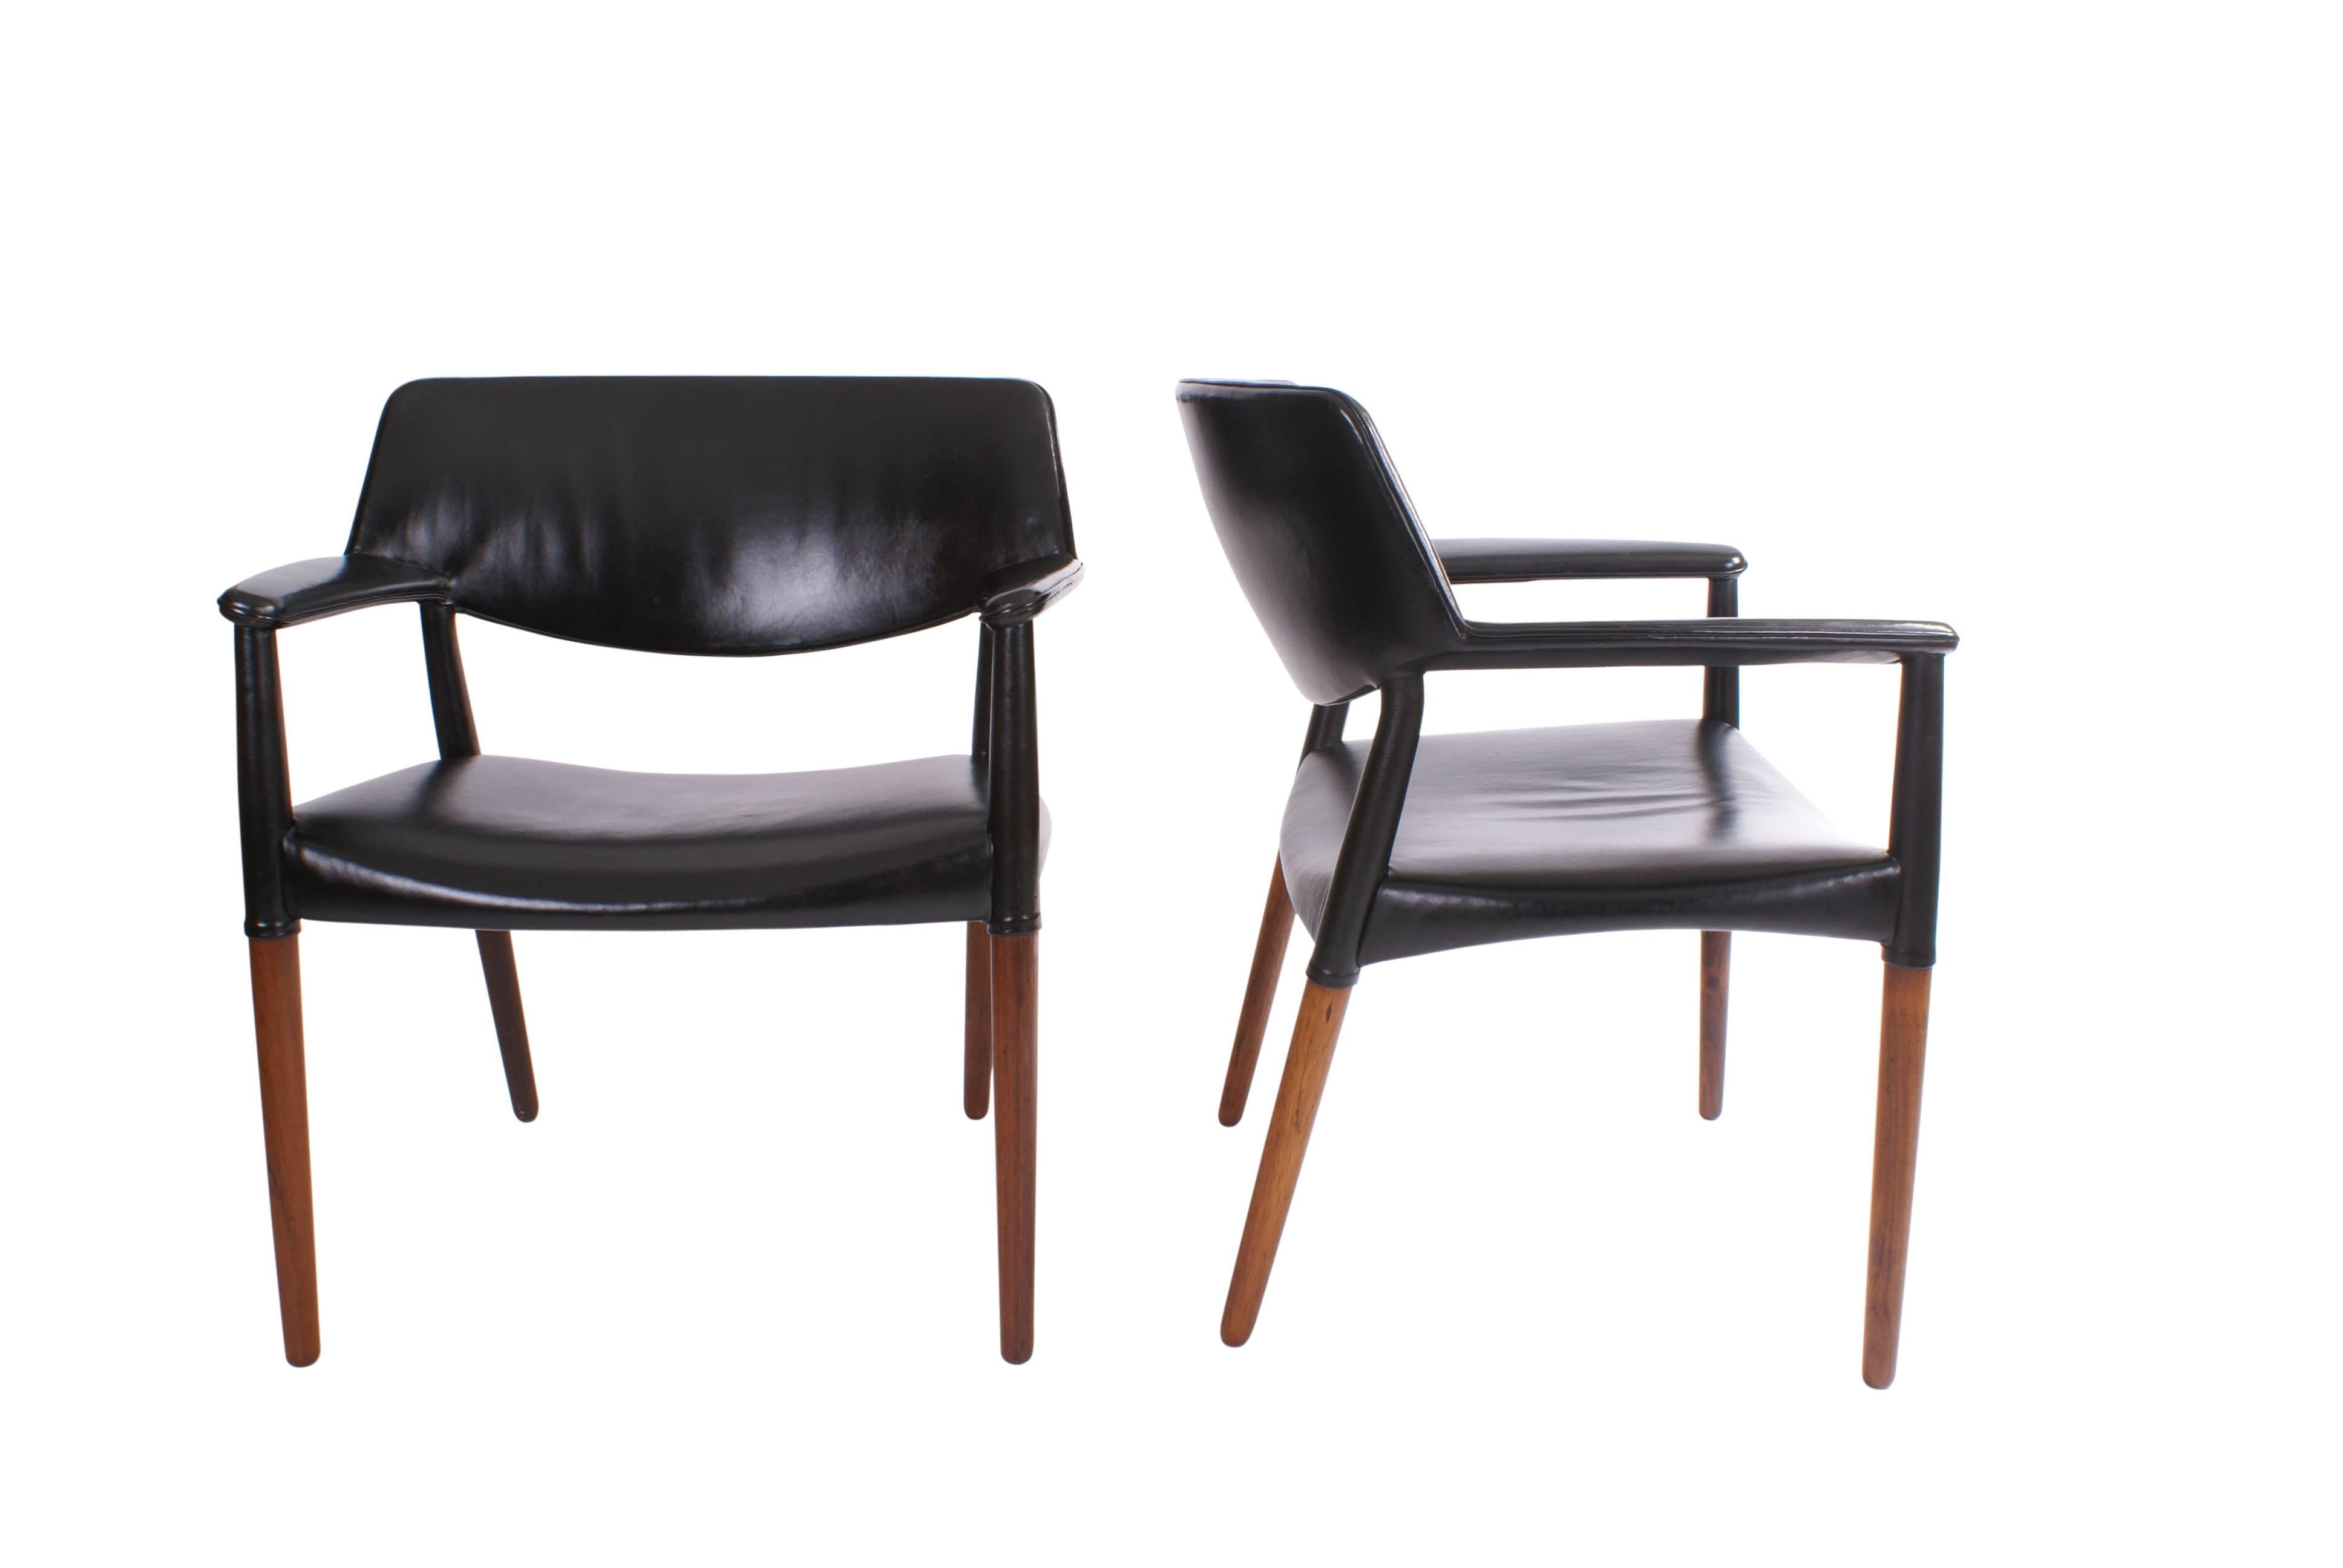 Pair of Ejner Larsen and Aksel Bender Madsen armchairs in Brazilian rosewood made by master cabinetmaker Willy Beck. Upholstered in original patinated black leather.

Discounted worldwide air shipping available on request.